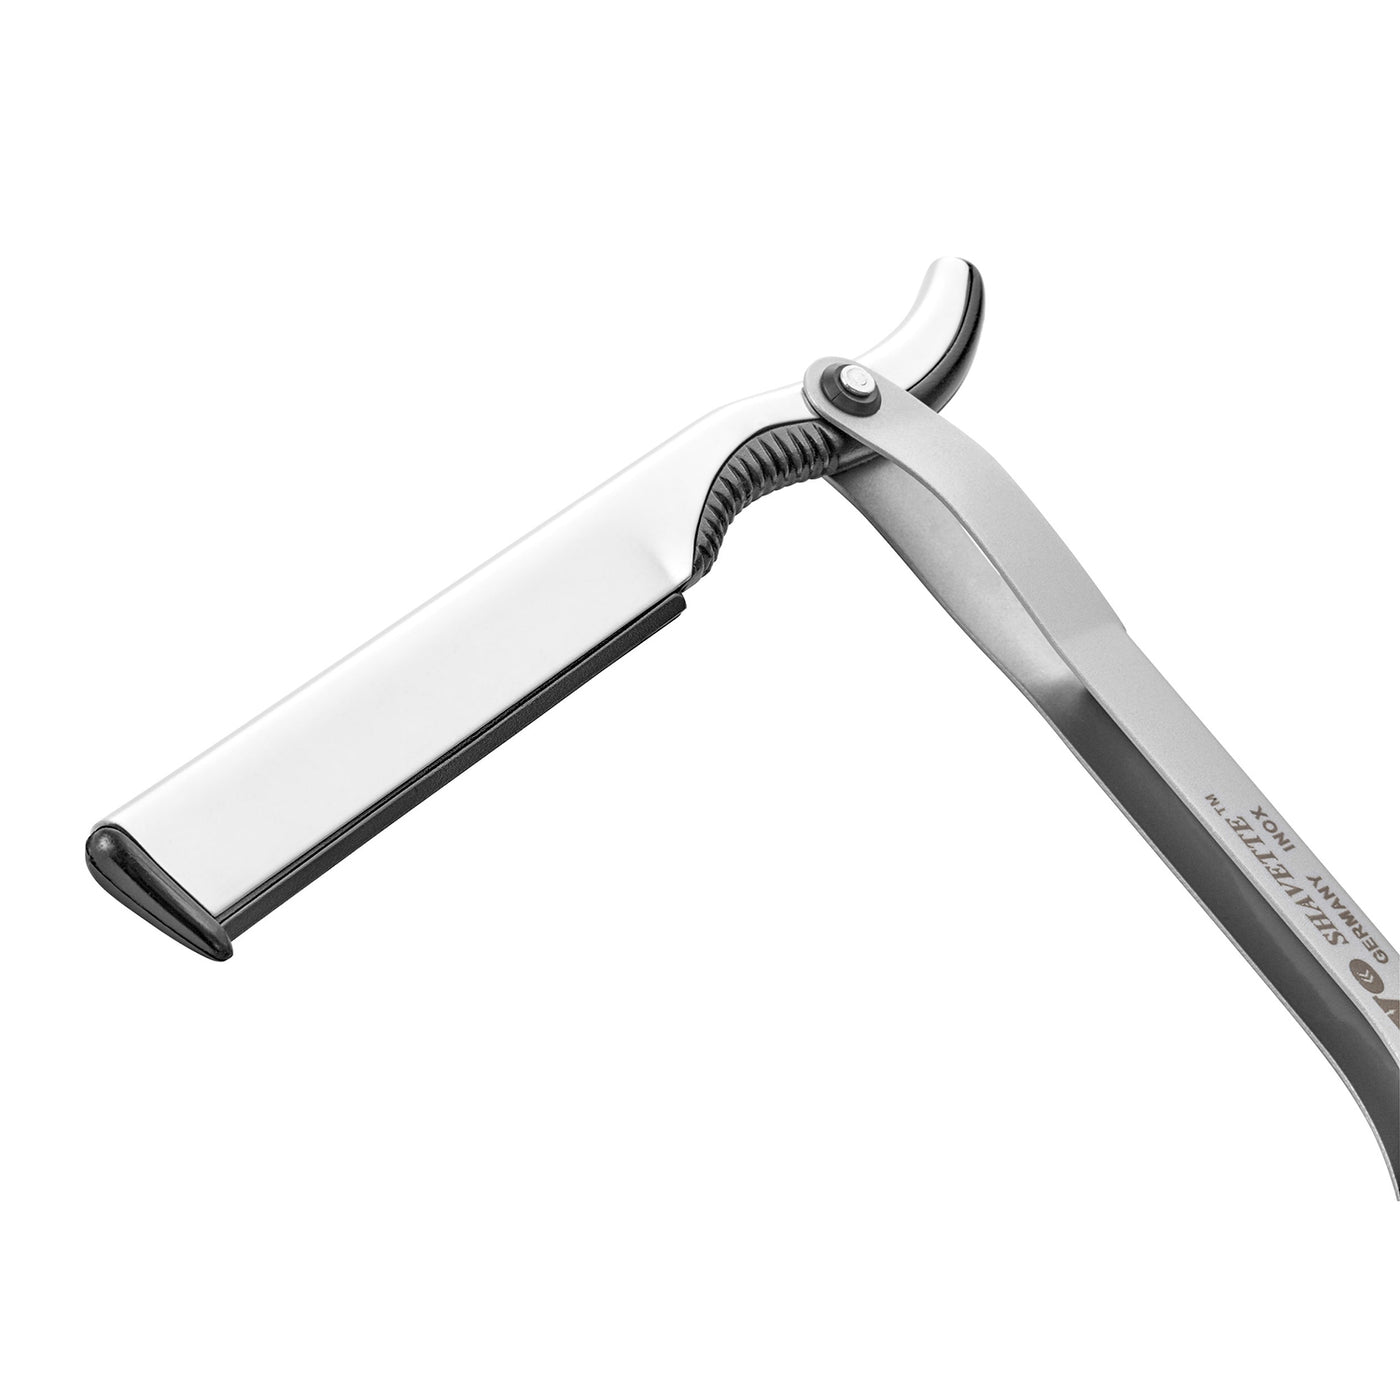  Dovo Aluminum Shavette by Dovo sold by Naked Armor Razors